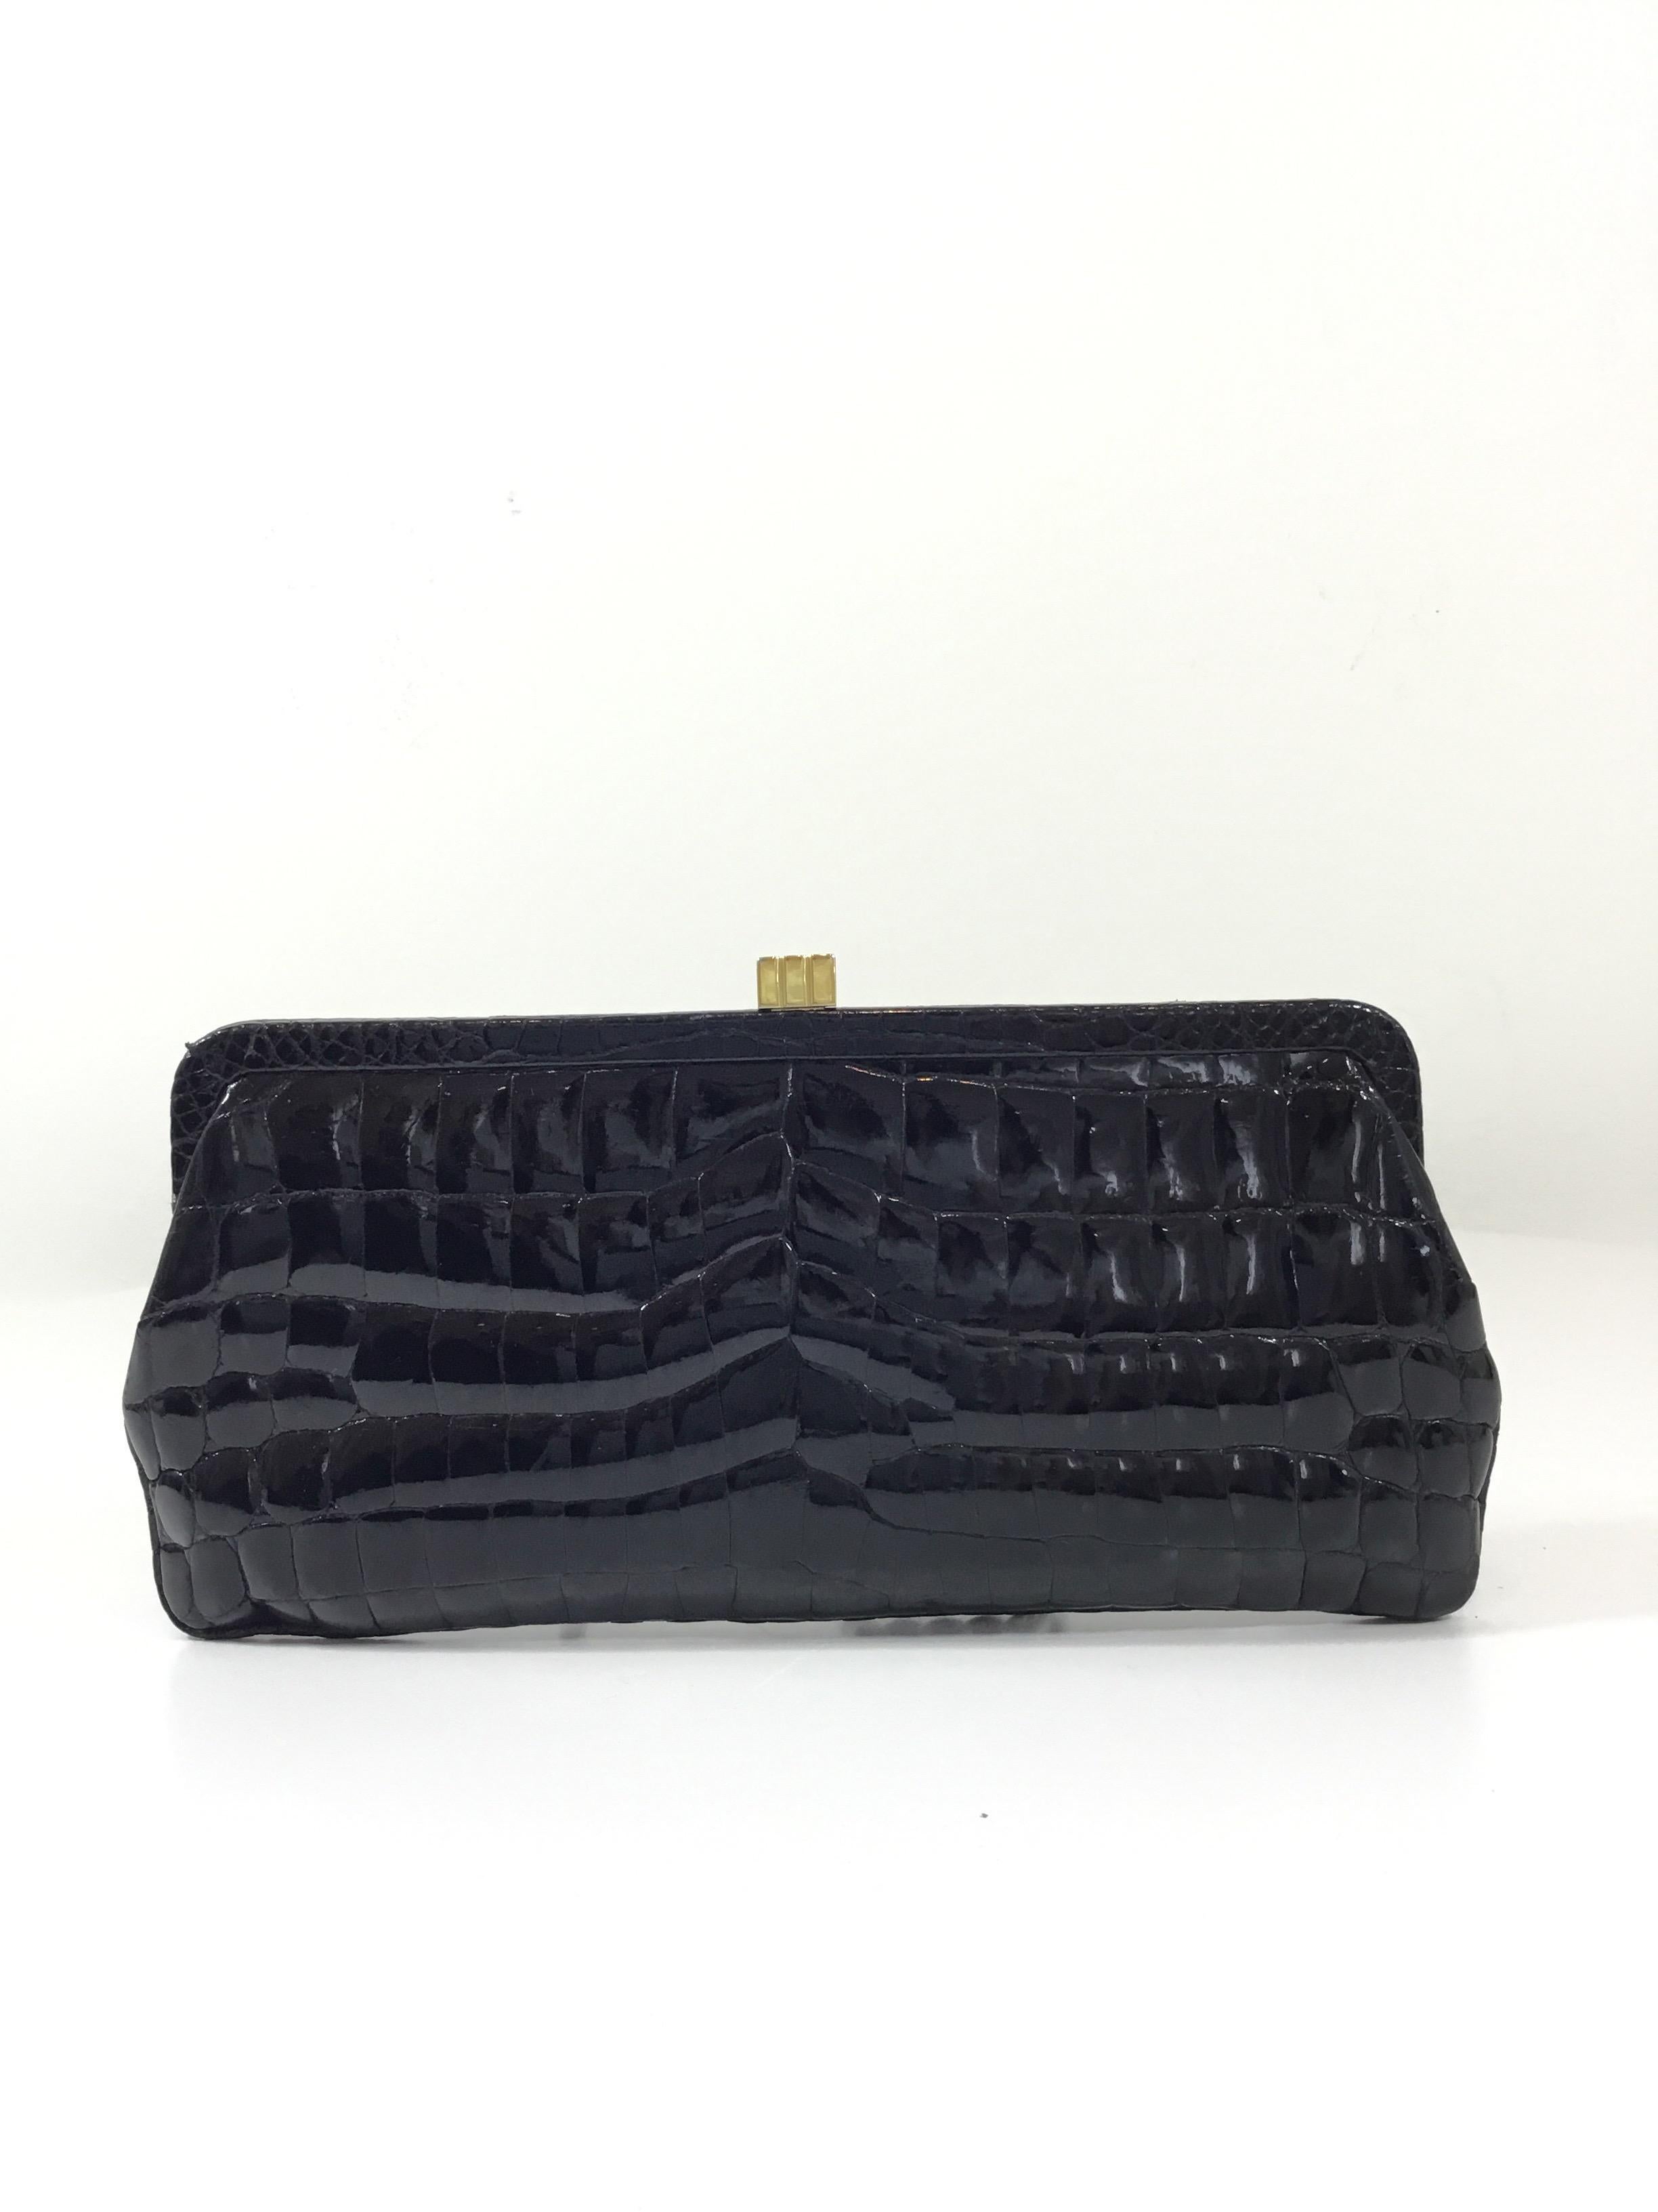 Lambertson Truex crocodile clutch in black with a gold-tone top clasp closure. Blue suede leather lining with one zipper pocket. Clutch is in mint condition -- No major flaws. Made in South Africa. Retail $4,200

Measurements: 
10'' x 5''